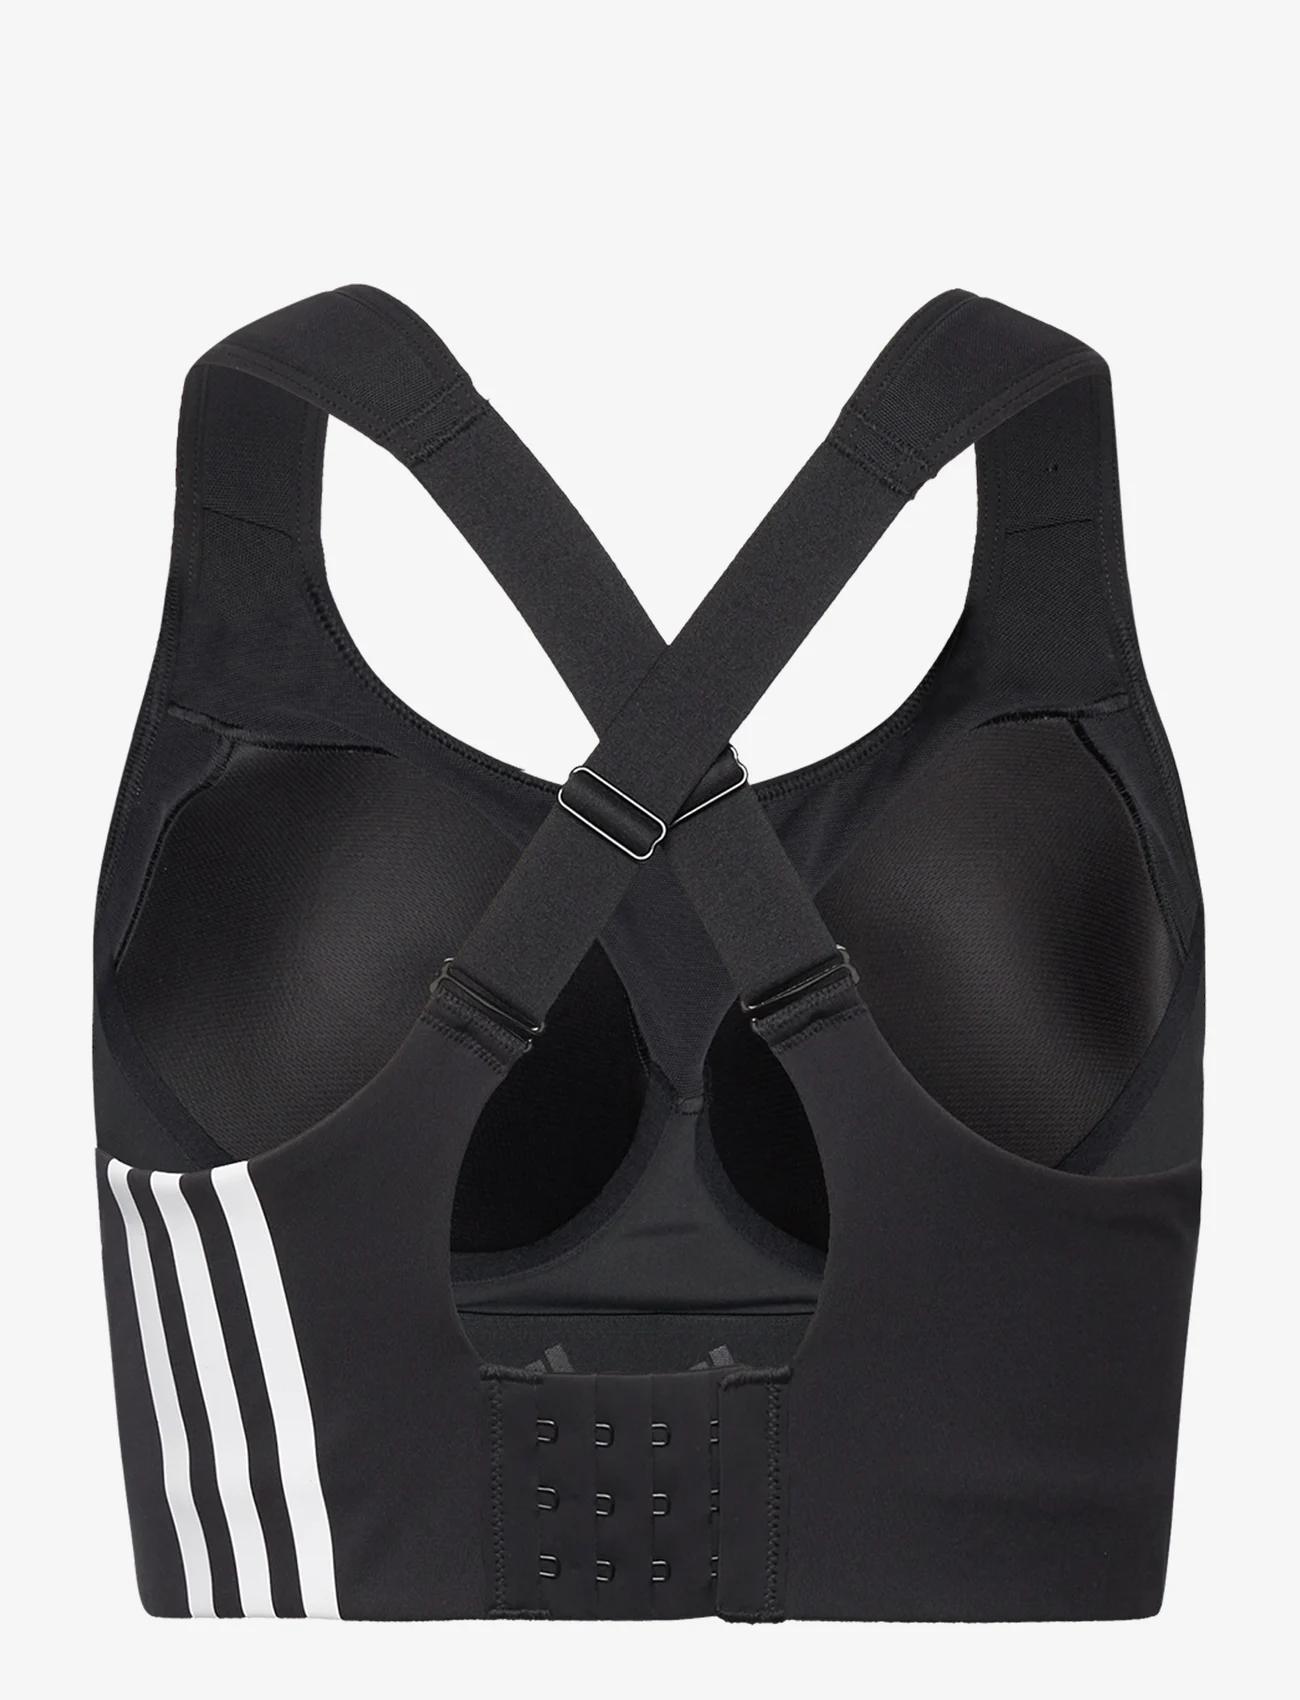 adidas Performance - TLRD Impact Training High Support Bra - high support - black - 1